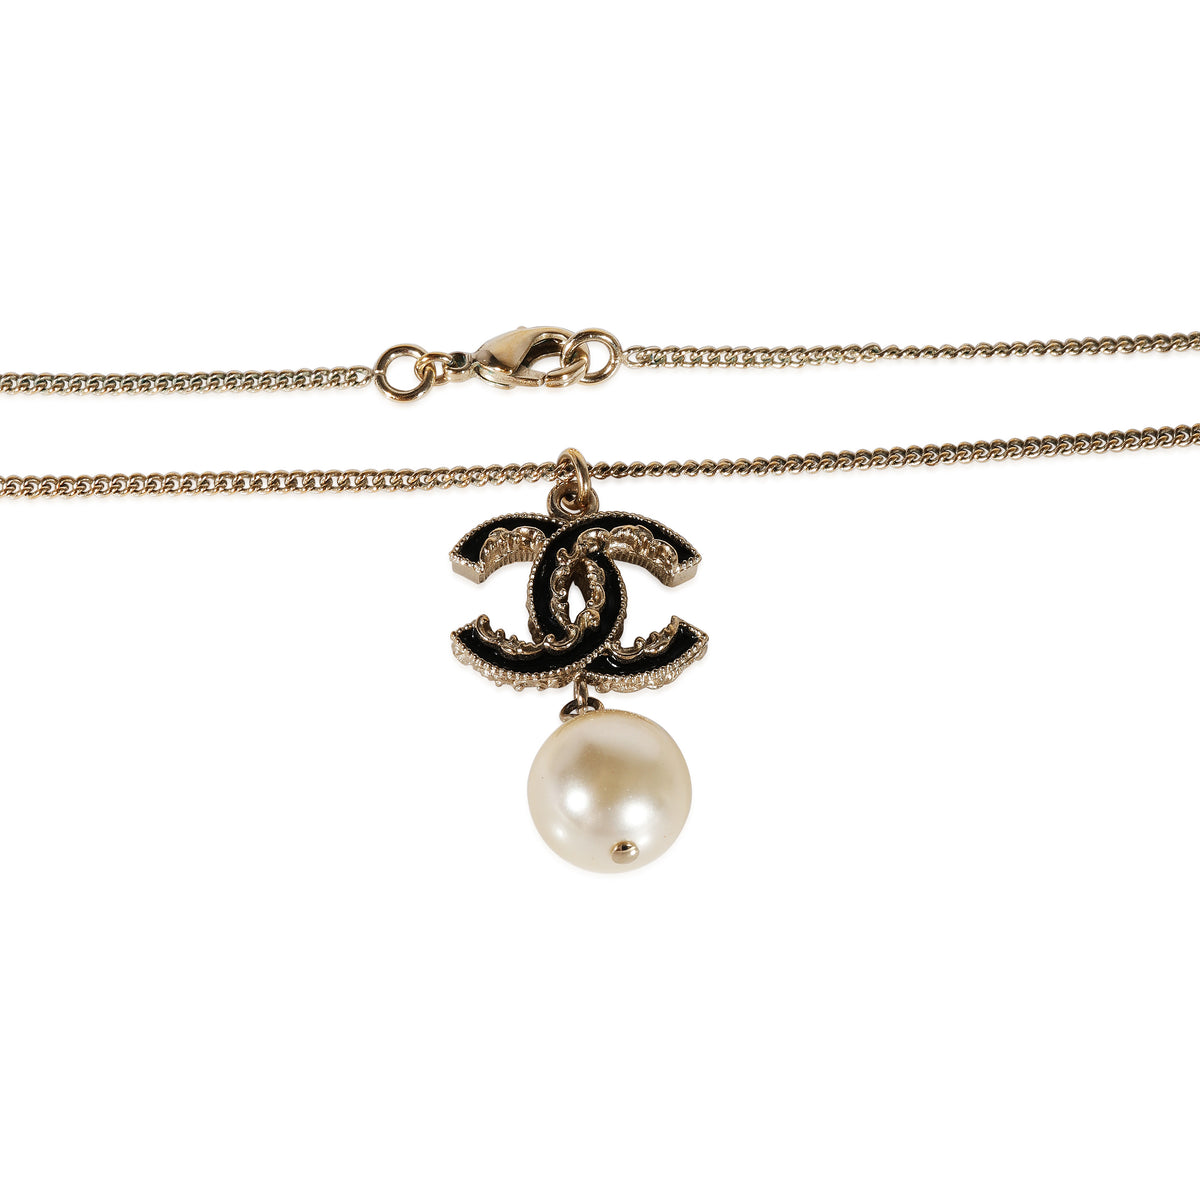 Chanel Ruffled CC with Black Enamel, Pearl Drop Pendant Necklace